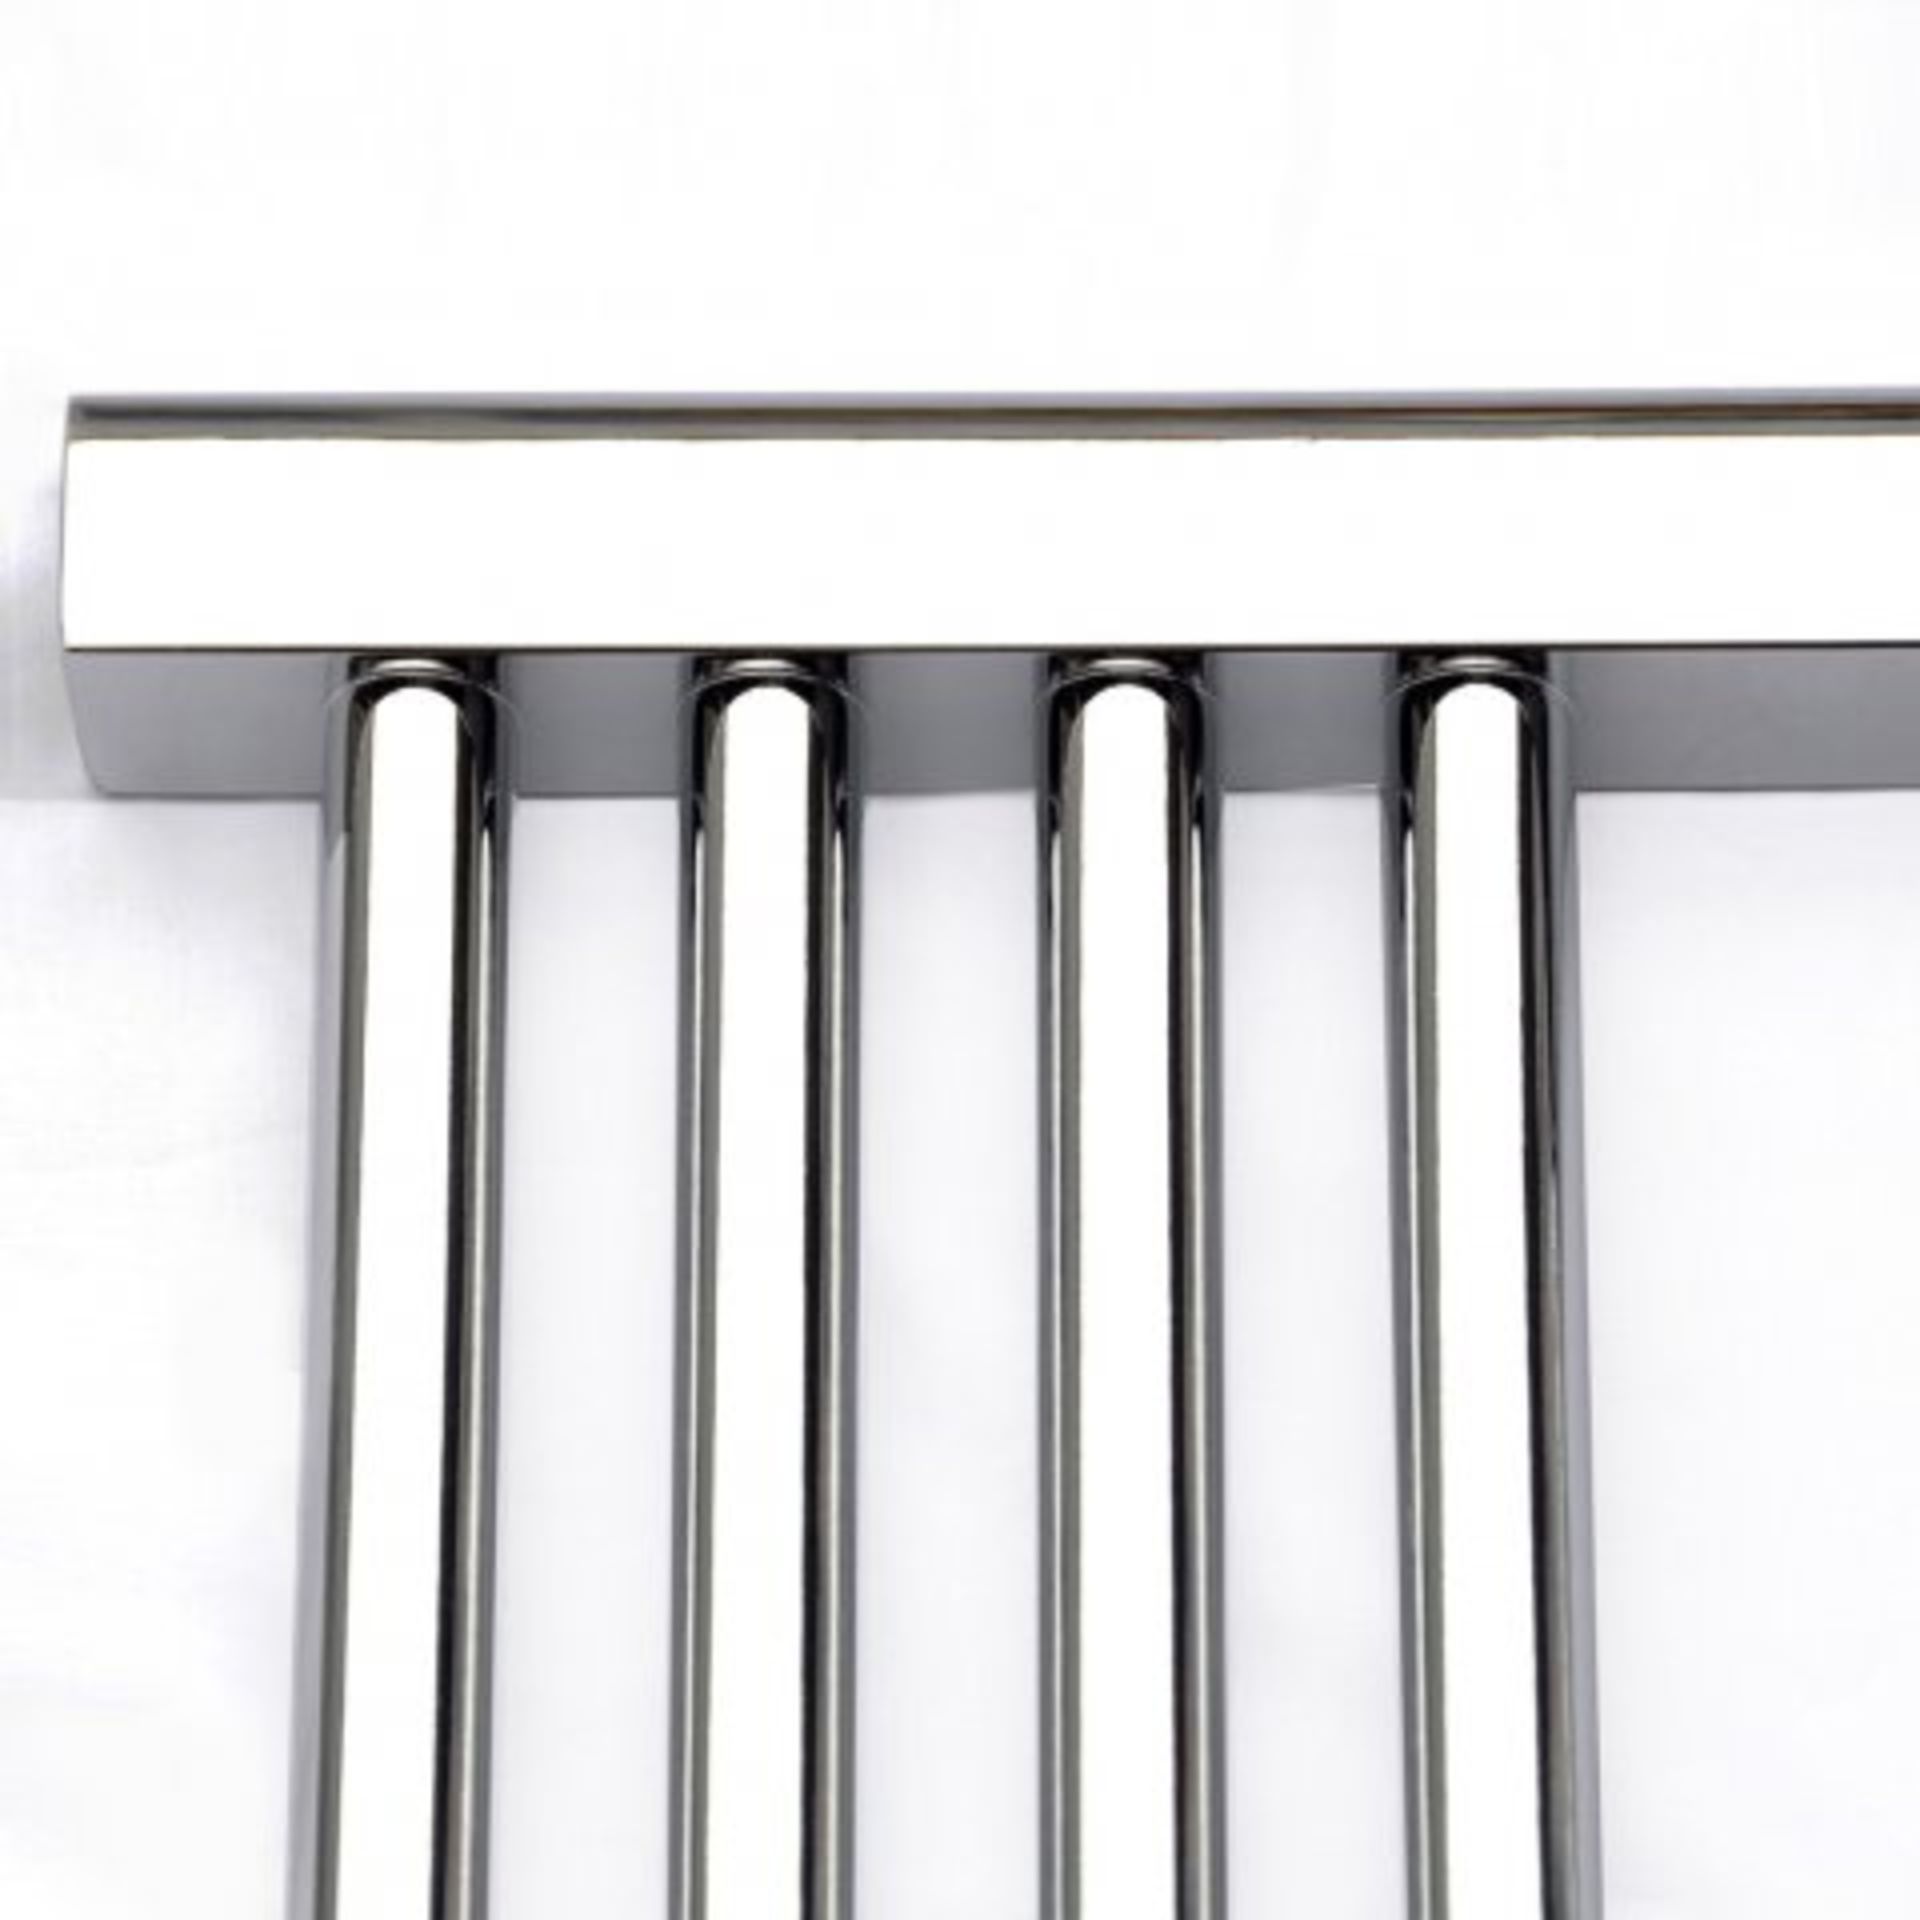 (L44) 1200x450mm - 25mm Tubes - Chrome Heated Straight Rail Ladder Towel Radiator Benefit from the - Image 8 of 8